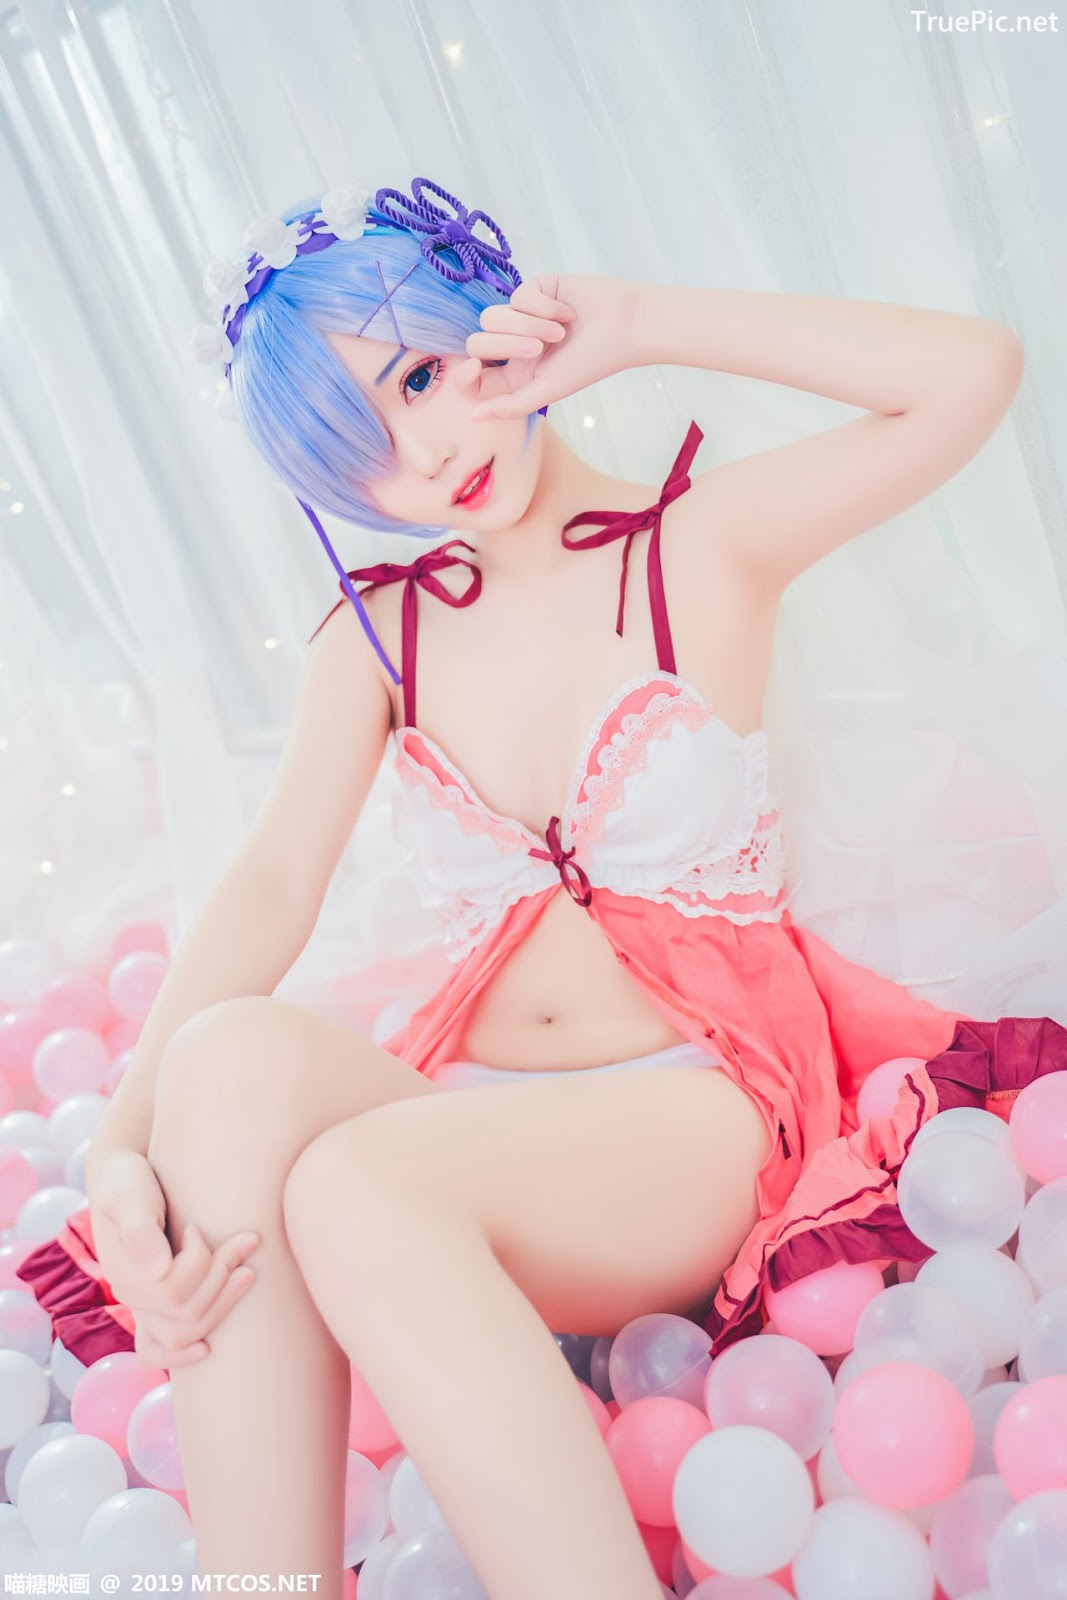 Image [MTCos] 喵糖映画 Vol.018 – Chinese Cute Model – Beautiful Rem Cosplay - TruePic.net - Picture-31